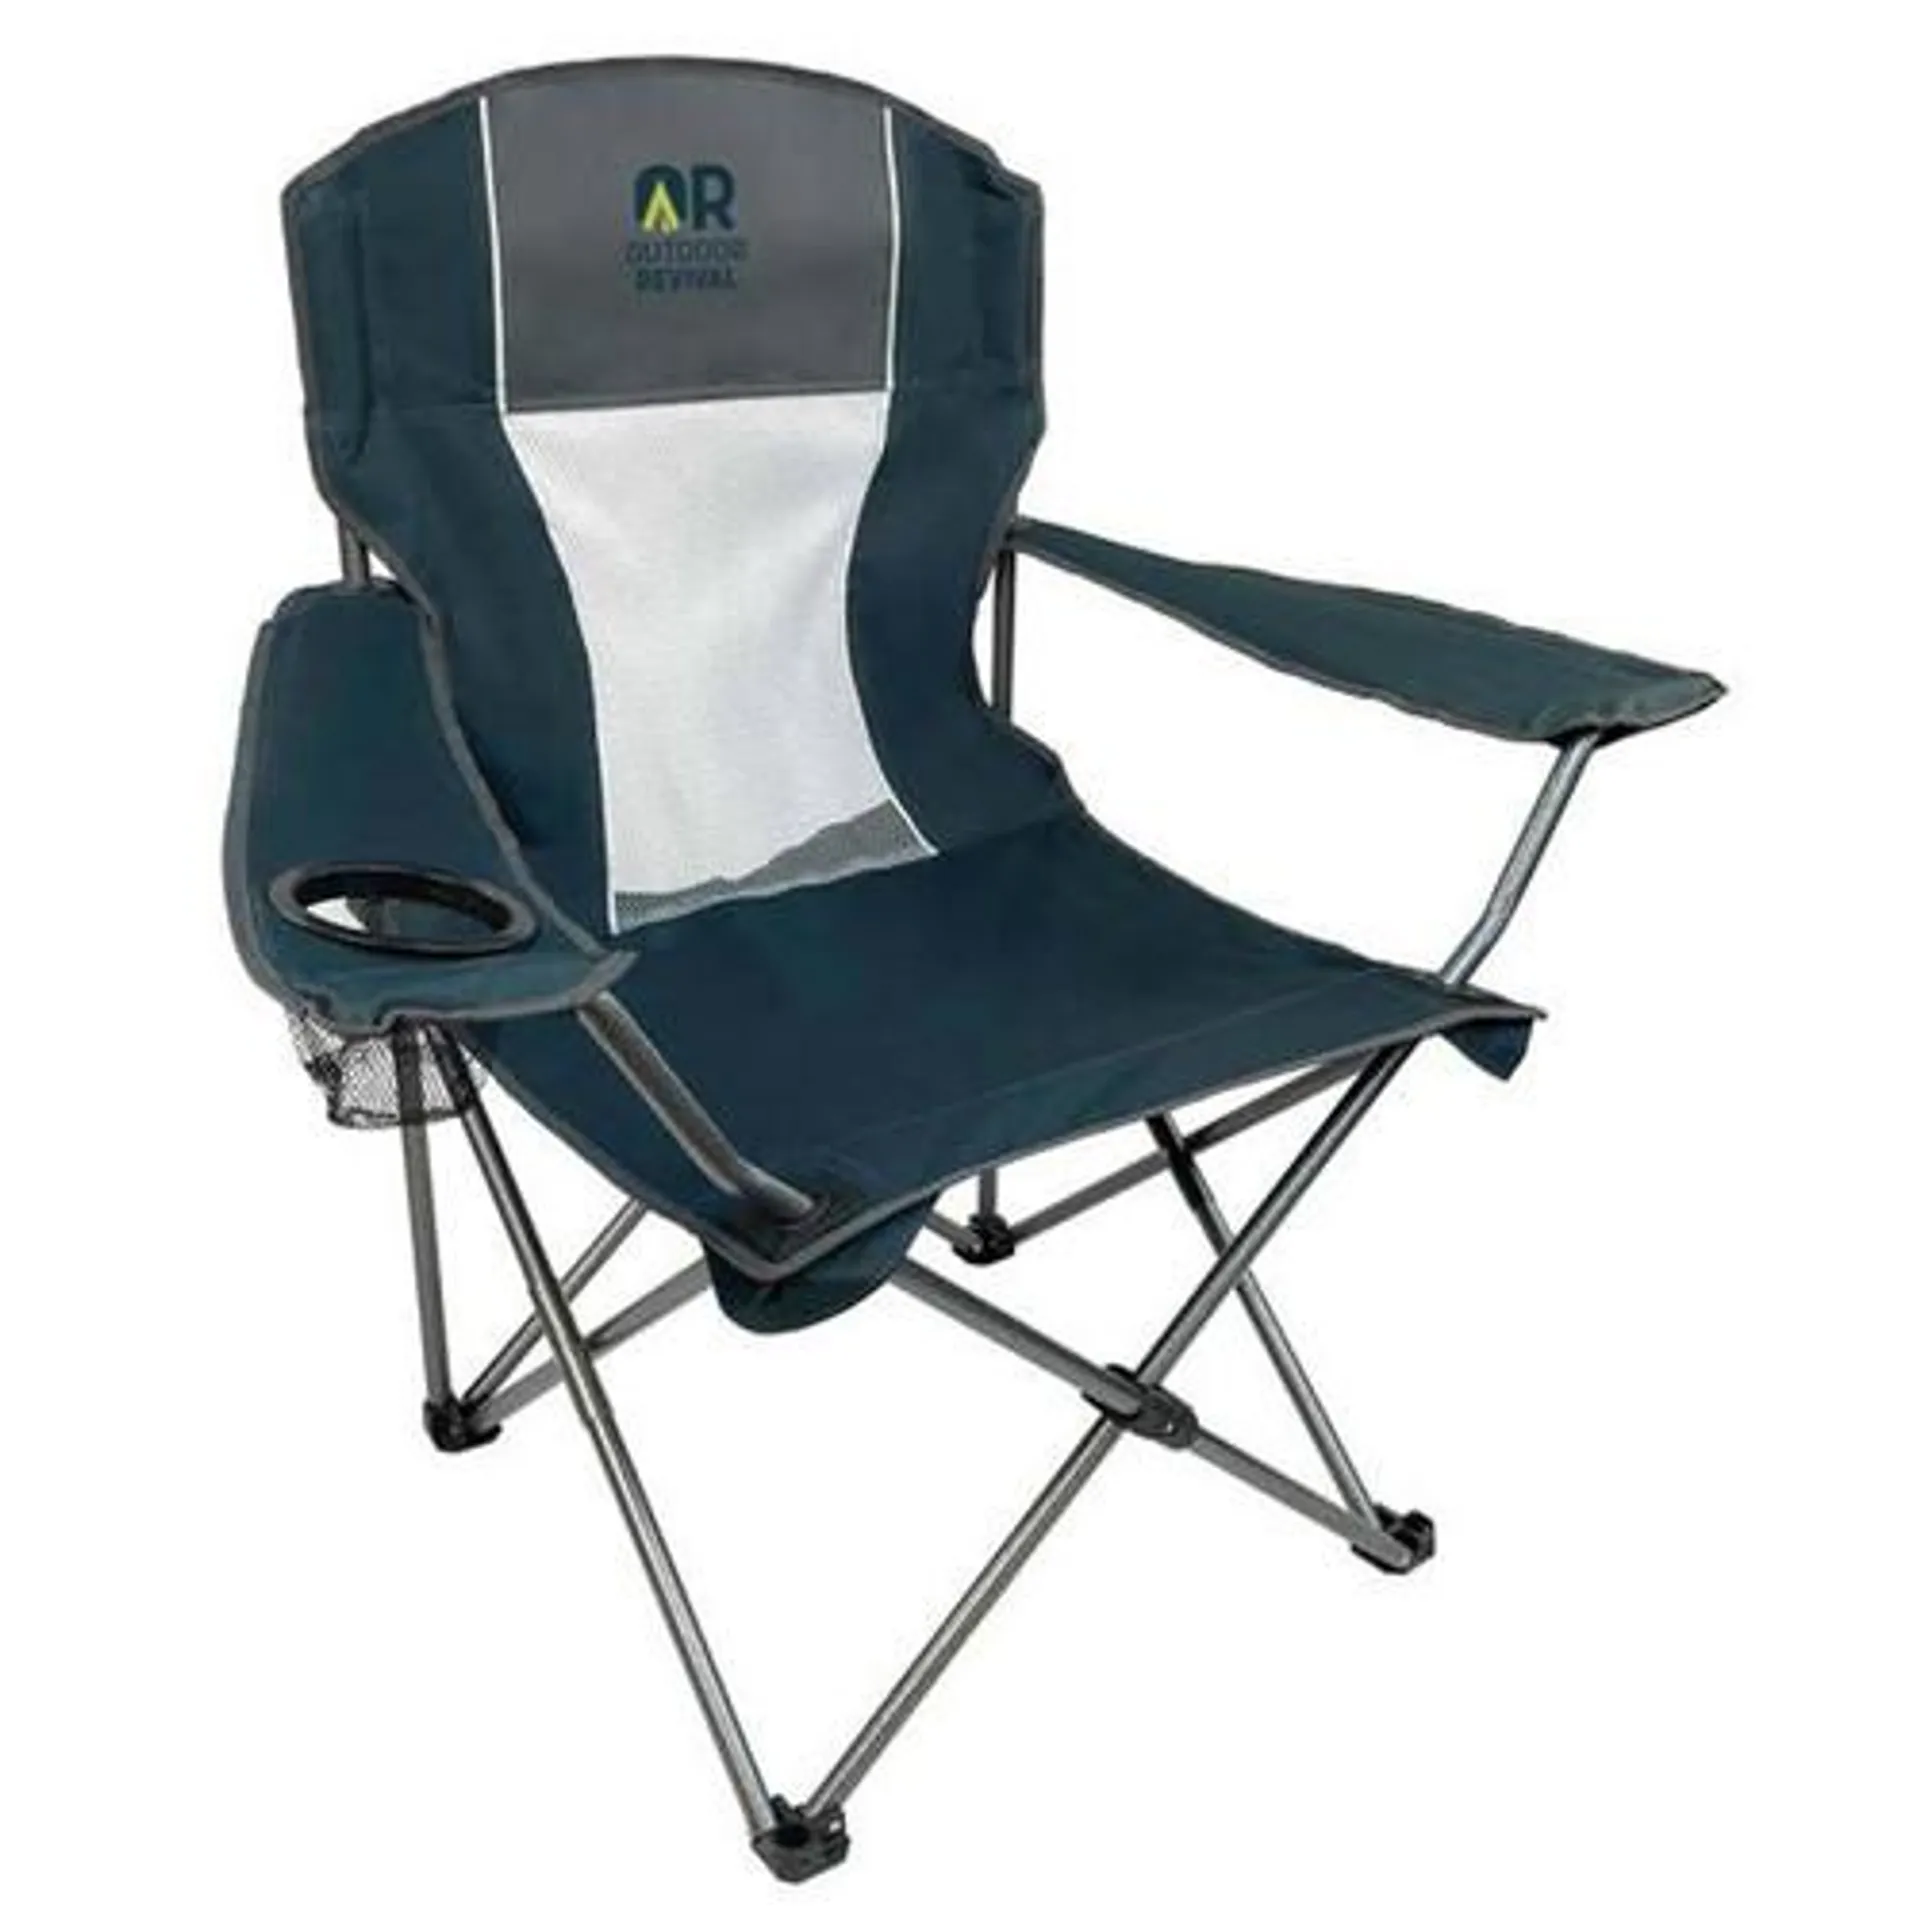 Outdoor Revival Extra Large Mesh Back Quad Chair